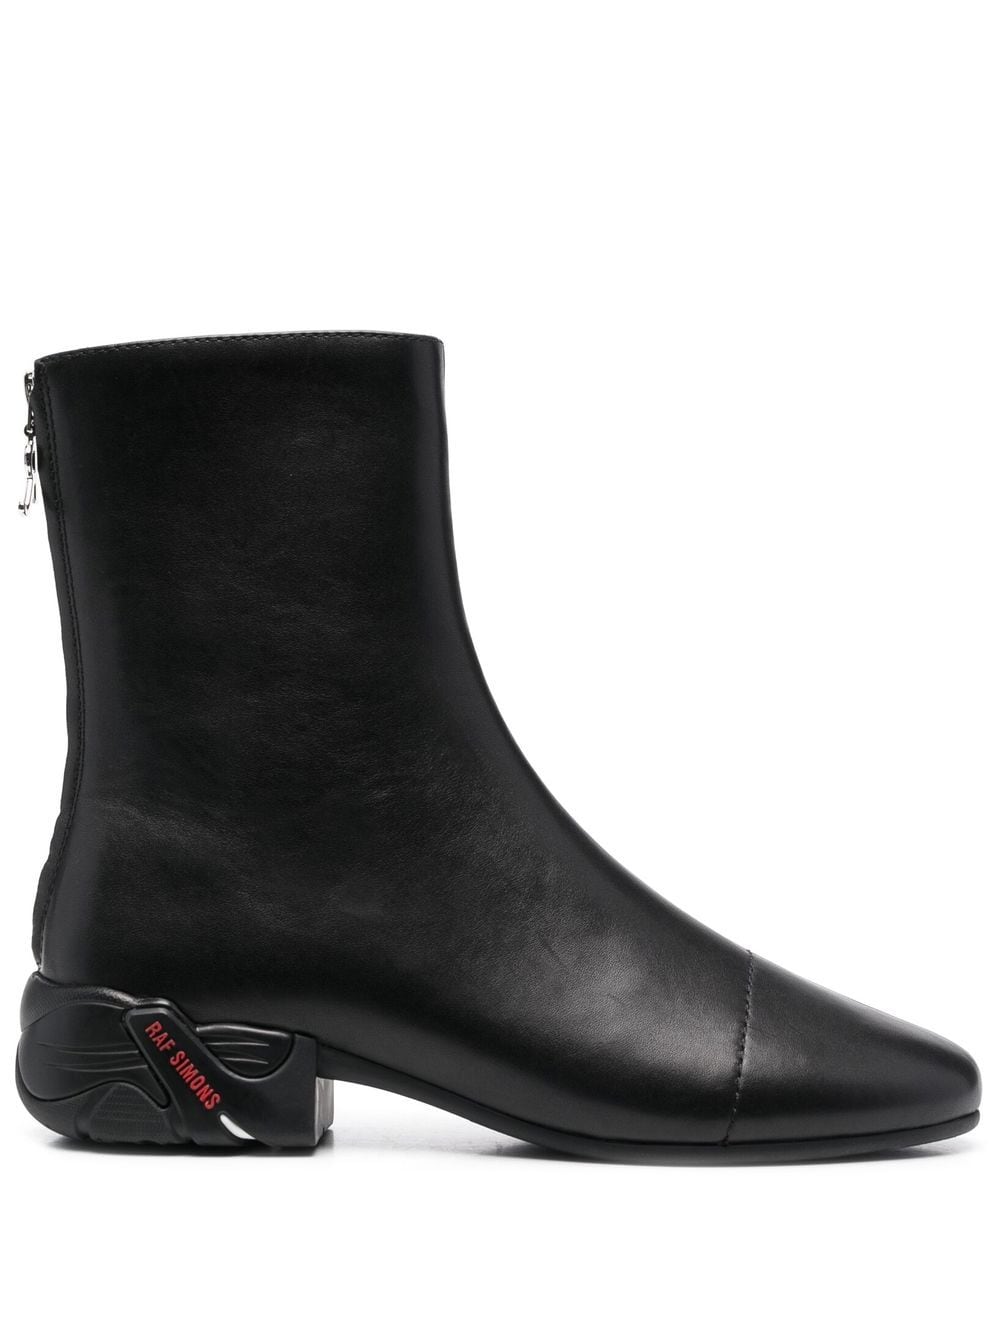 Image 1 of Raf Simons Solaris zip-up ankle boots